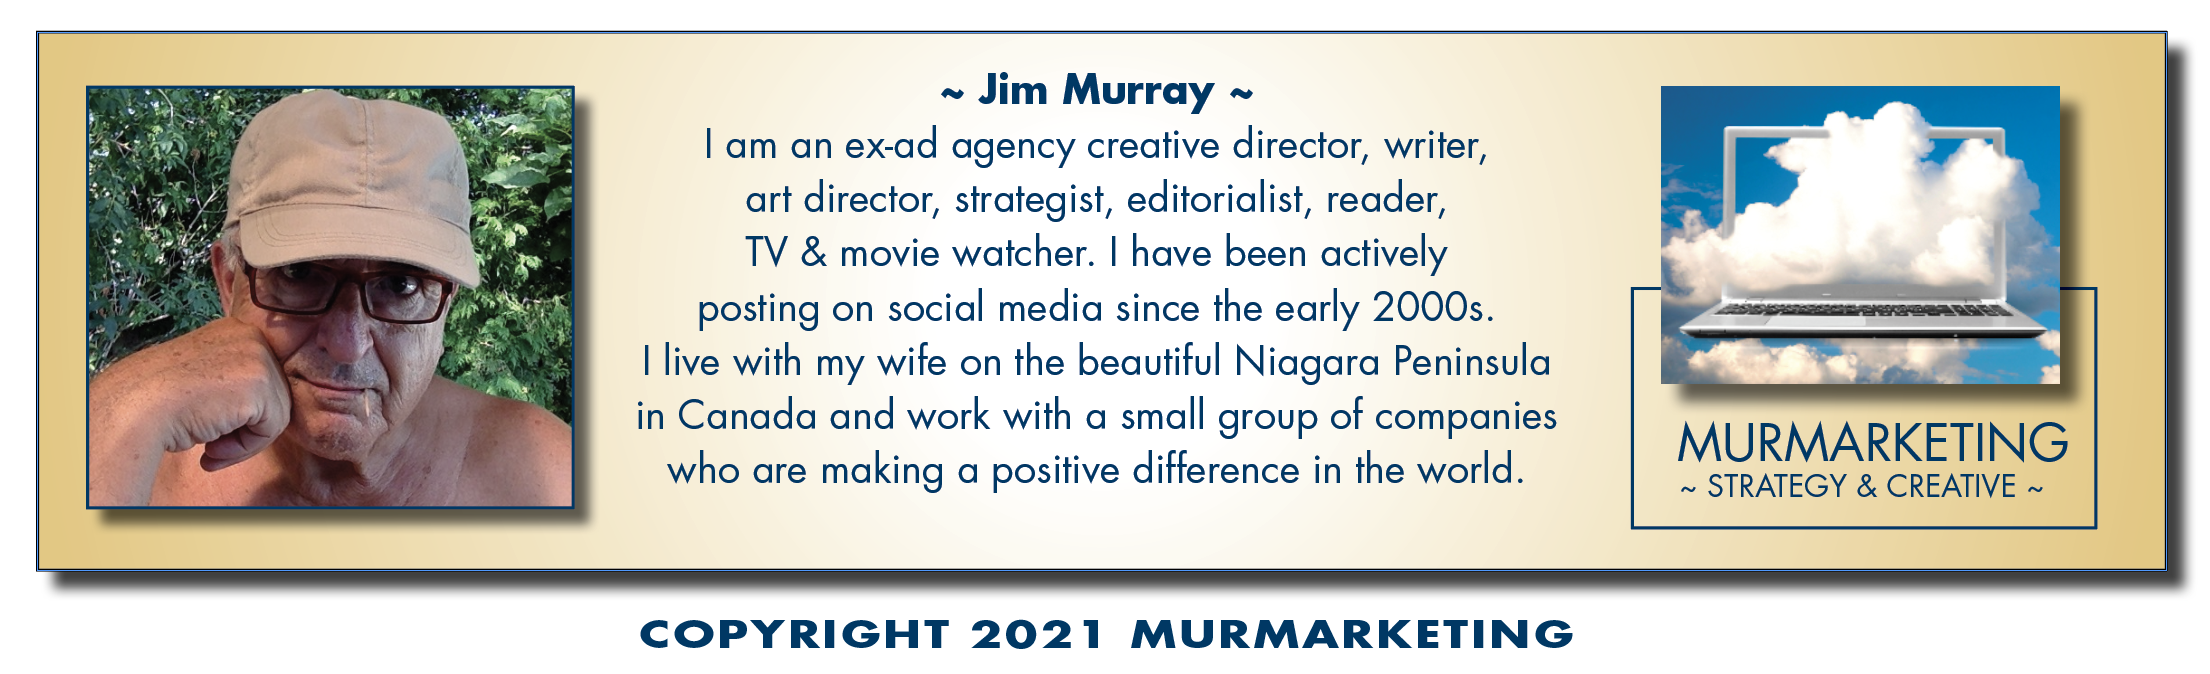 ~ Jim Murray ~
| am an ex-ad agency creative director, writer,
art director, strategist, editorialist, reader,
TV & movie watcher. | have been actively
posting on social media since the early 2000s.

| live with my wife on the beautiful Niagara Peninsula

in Canada and work with a small group of companies MURMARKETING
who are making a positive difference in the world. ~ STRATEGY & CREATIVE ~

 

COPYRIGHT 2021 MURMARKETING